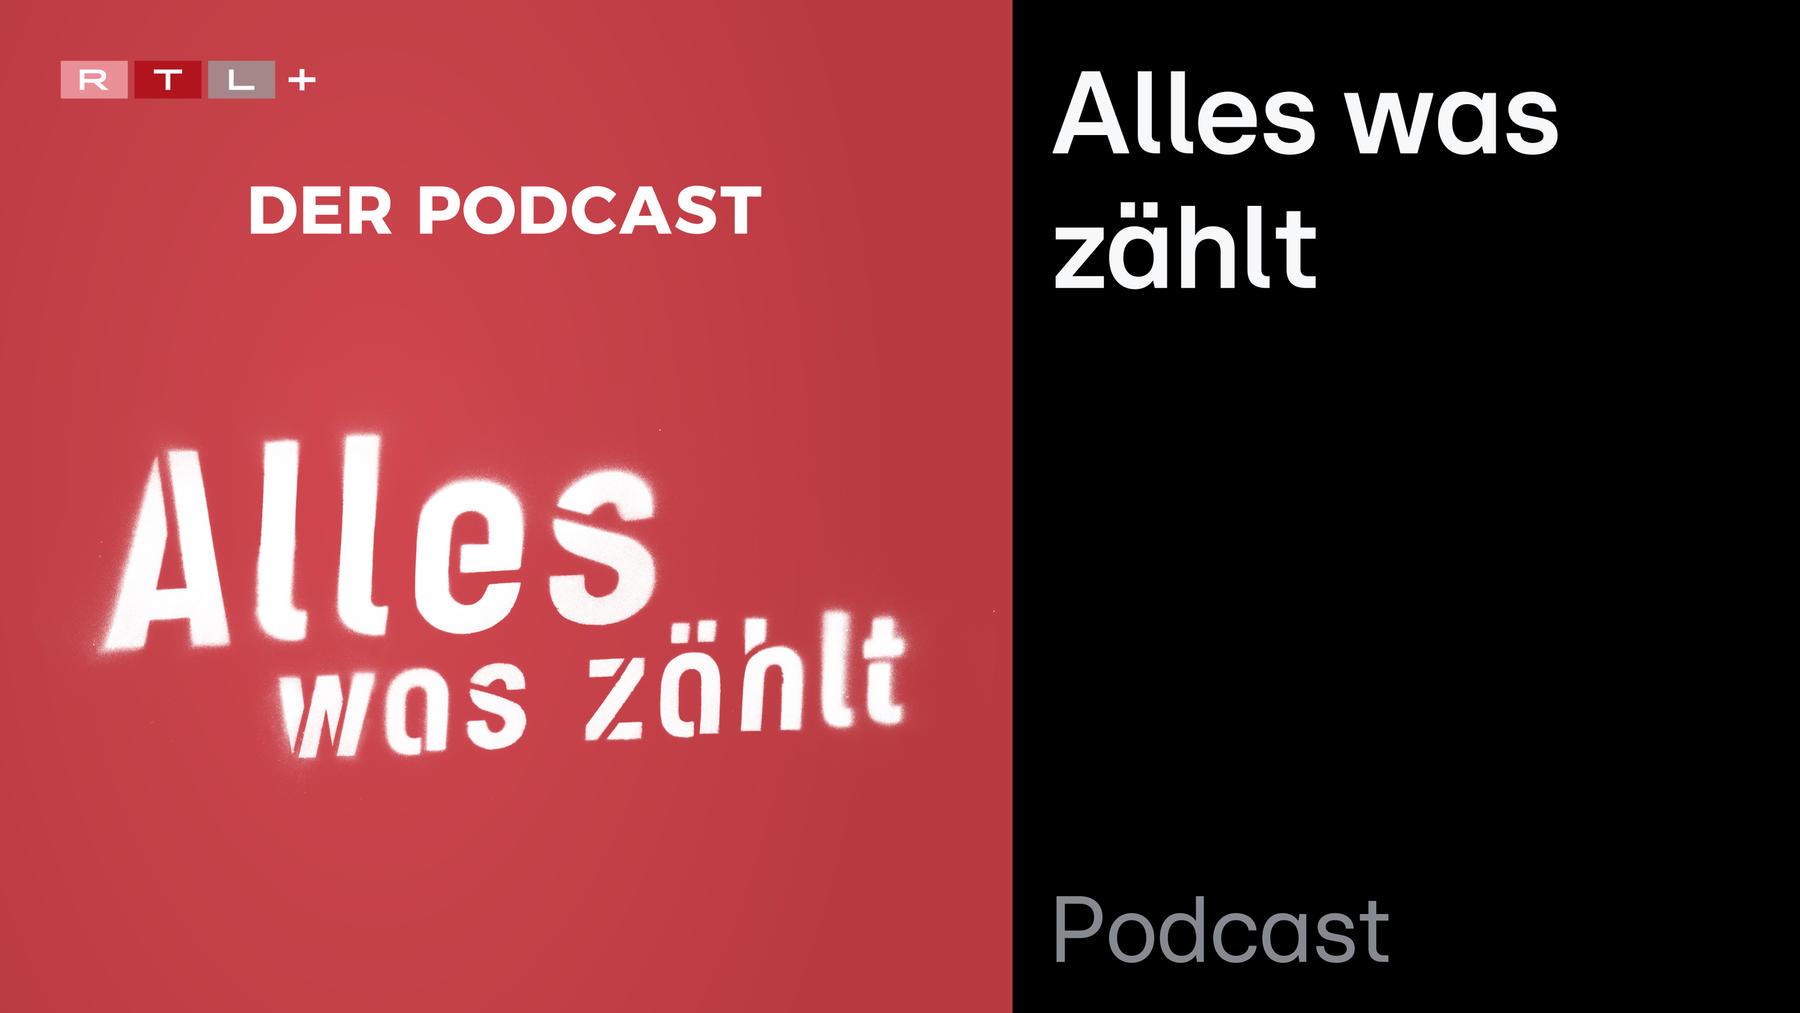 Podcast: Alles was zählt